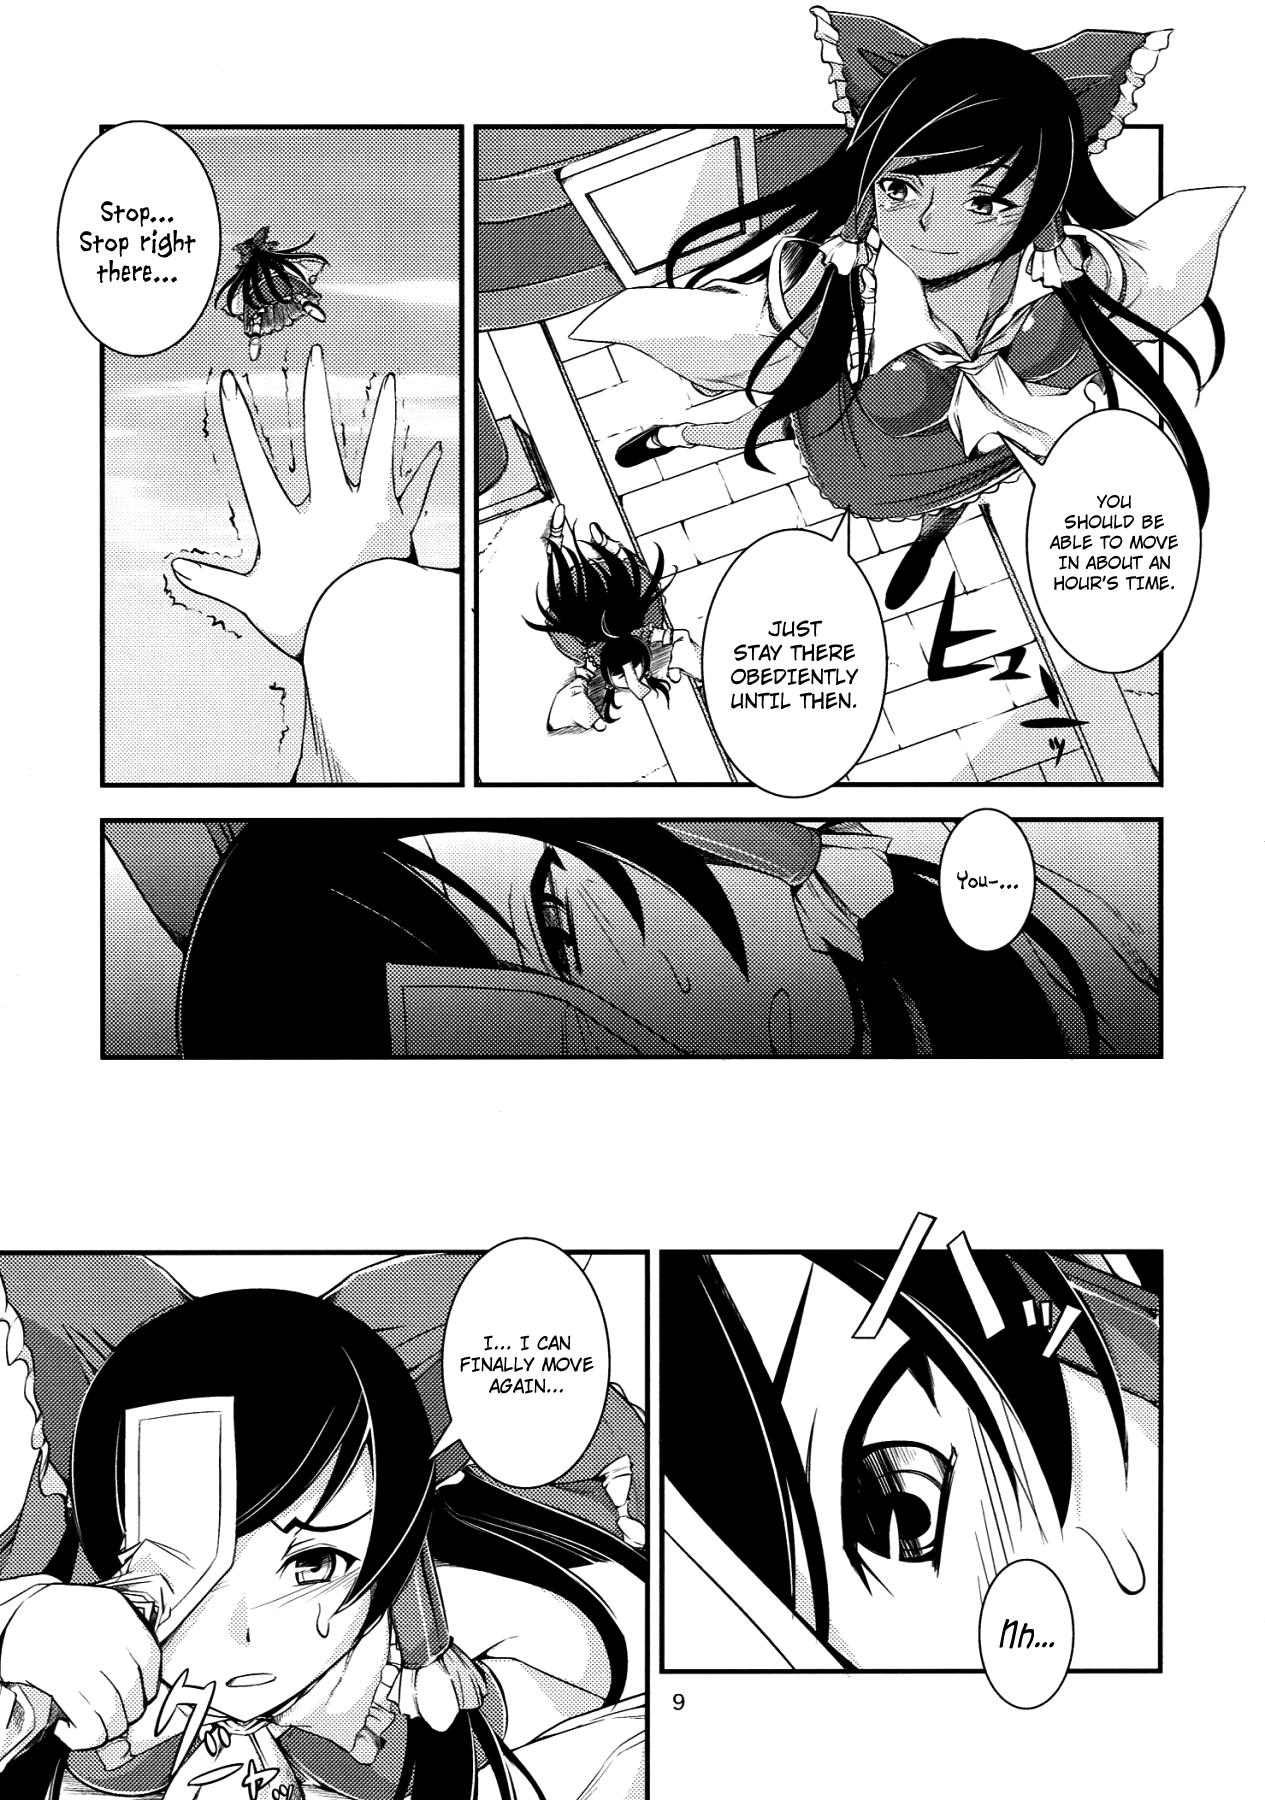 High Definition The Incident of the Black Shrine Maiden - Touhou project Hot Girls Fucking - Page 8